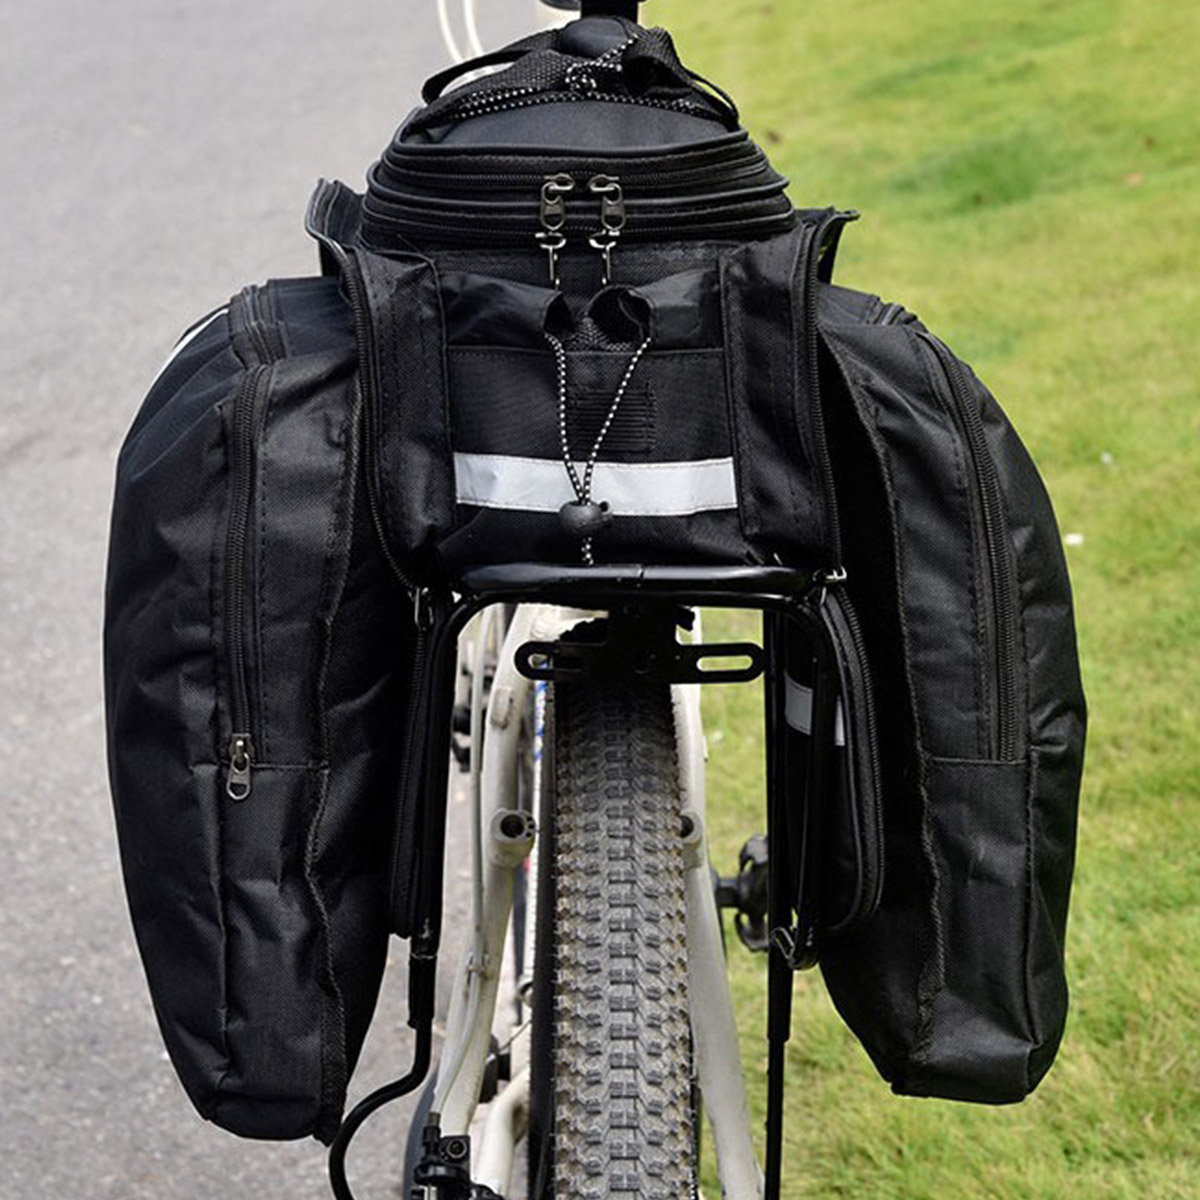 27L-Bicycle-Riding-Package-Large-Capacity-Waterproof-Reflective-Strips-Outdoor-Riding-Bag-1874551-10